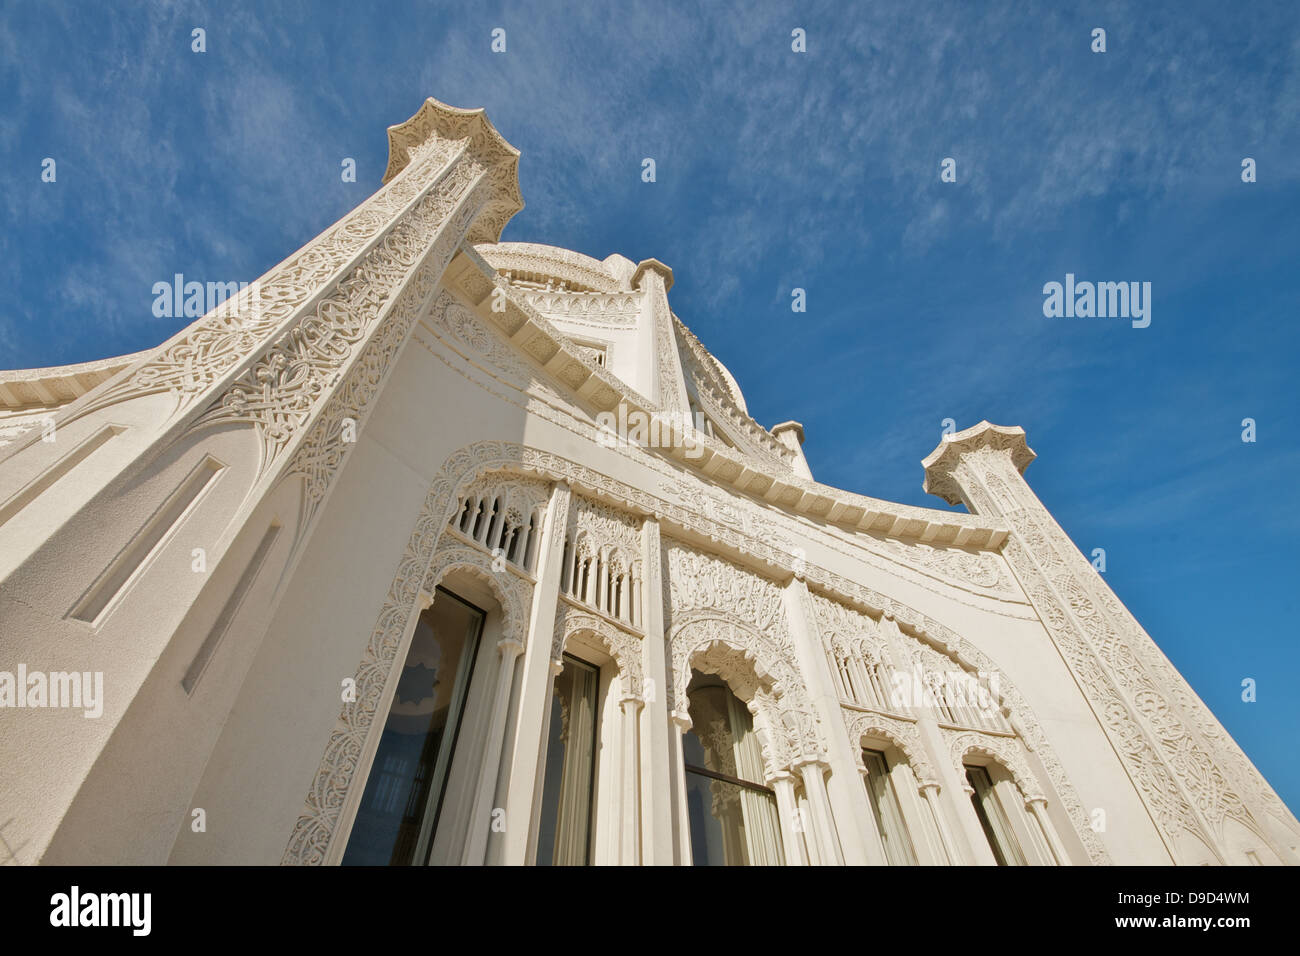 The Baha'i House of Worship in Wilmette, Chicago. Stock Photo